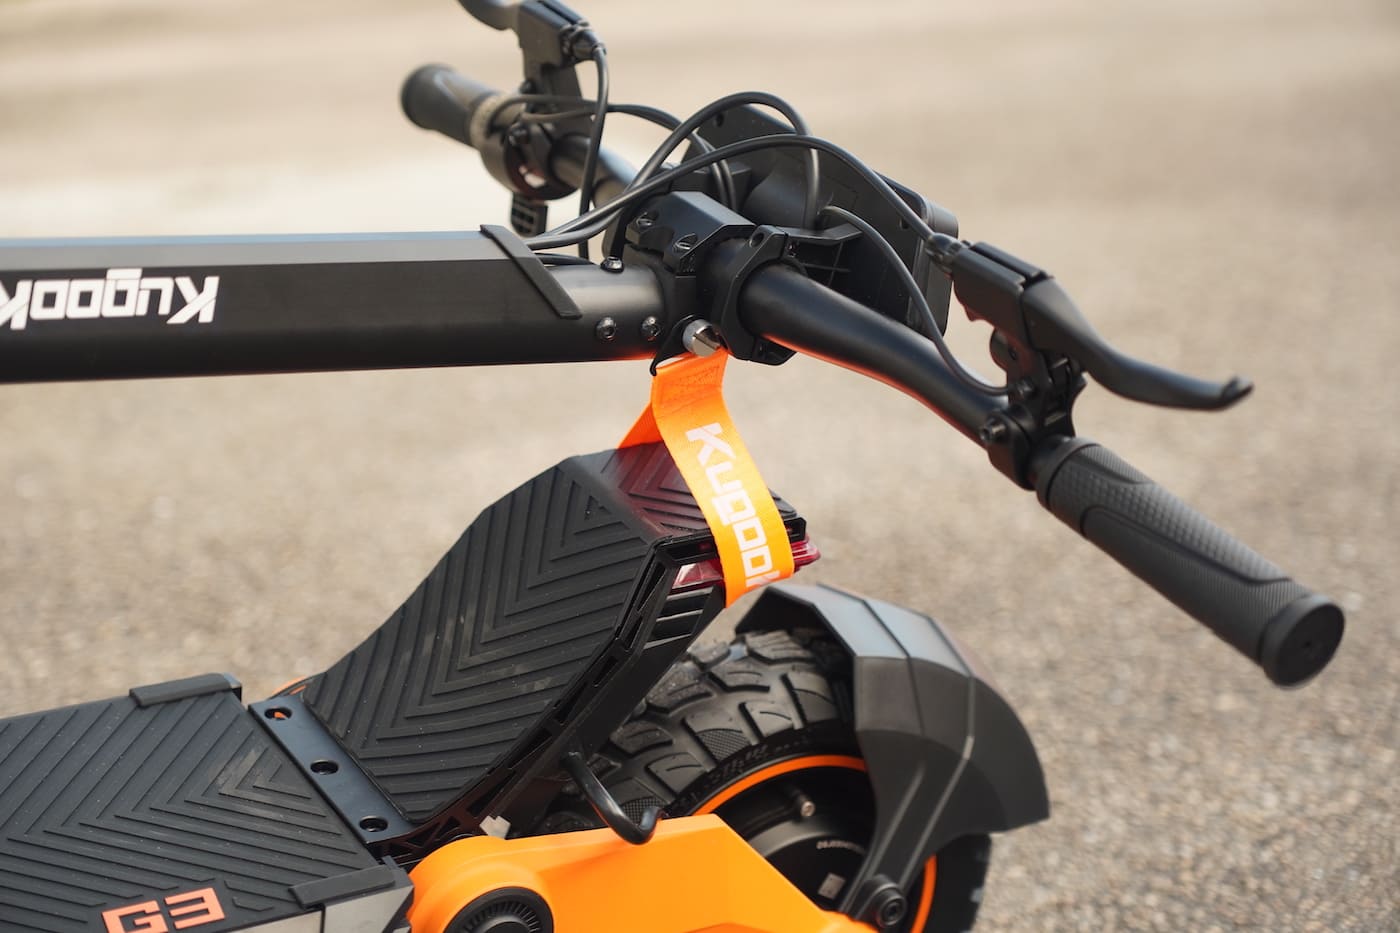 Kugoo Kirin G3 electric scooter review: Fast and comfortable!